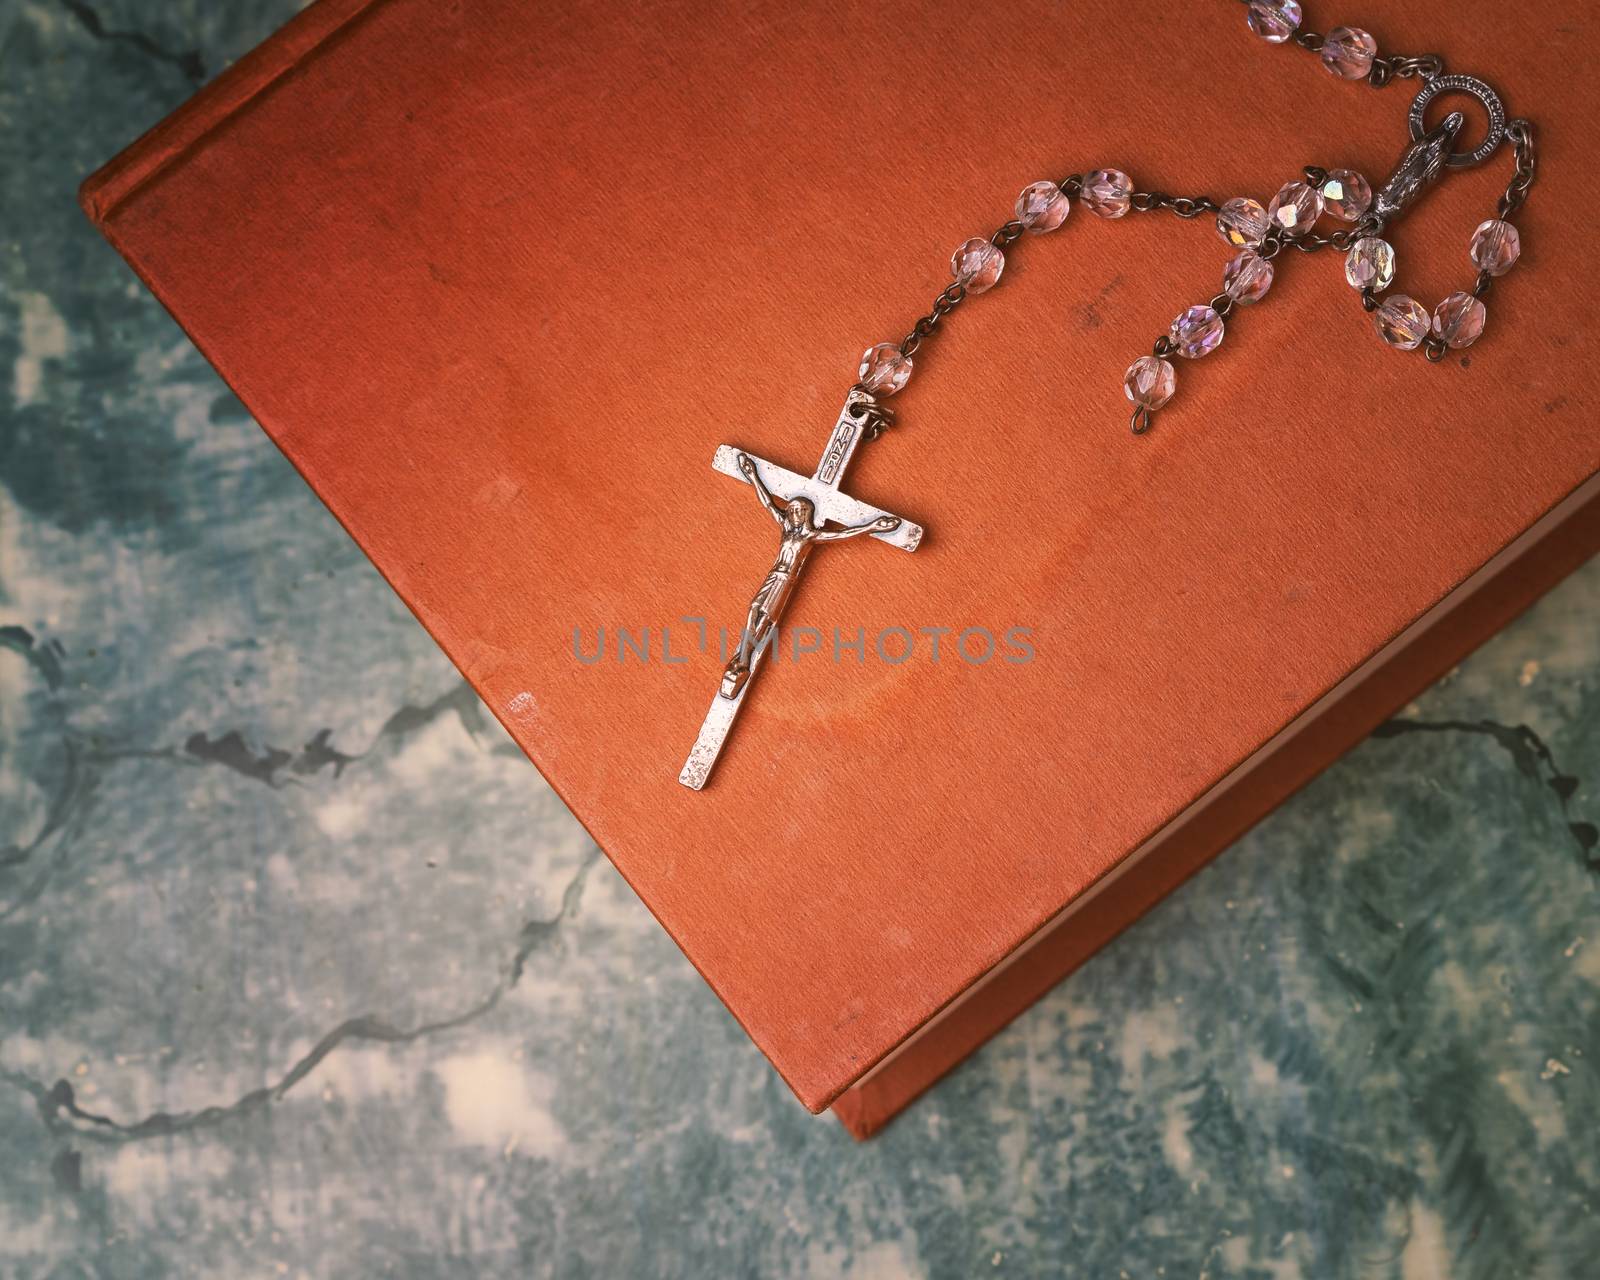 Rosary and cross resting on the closed book  by Robertobinetti70